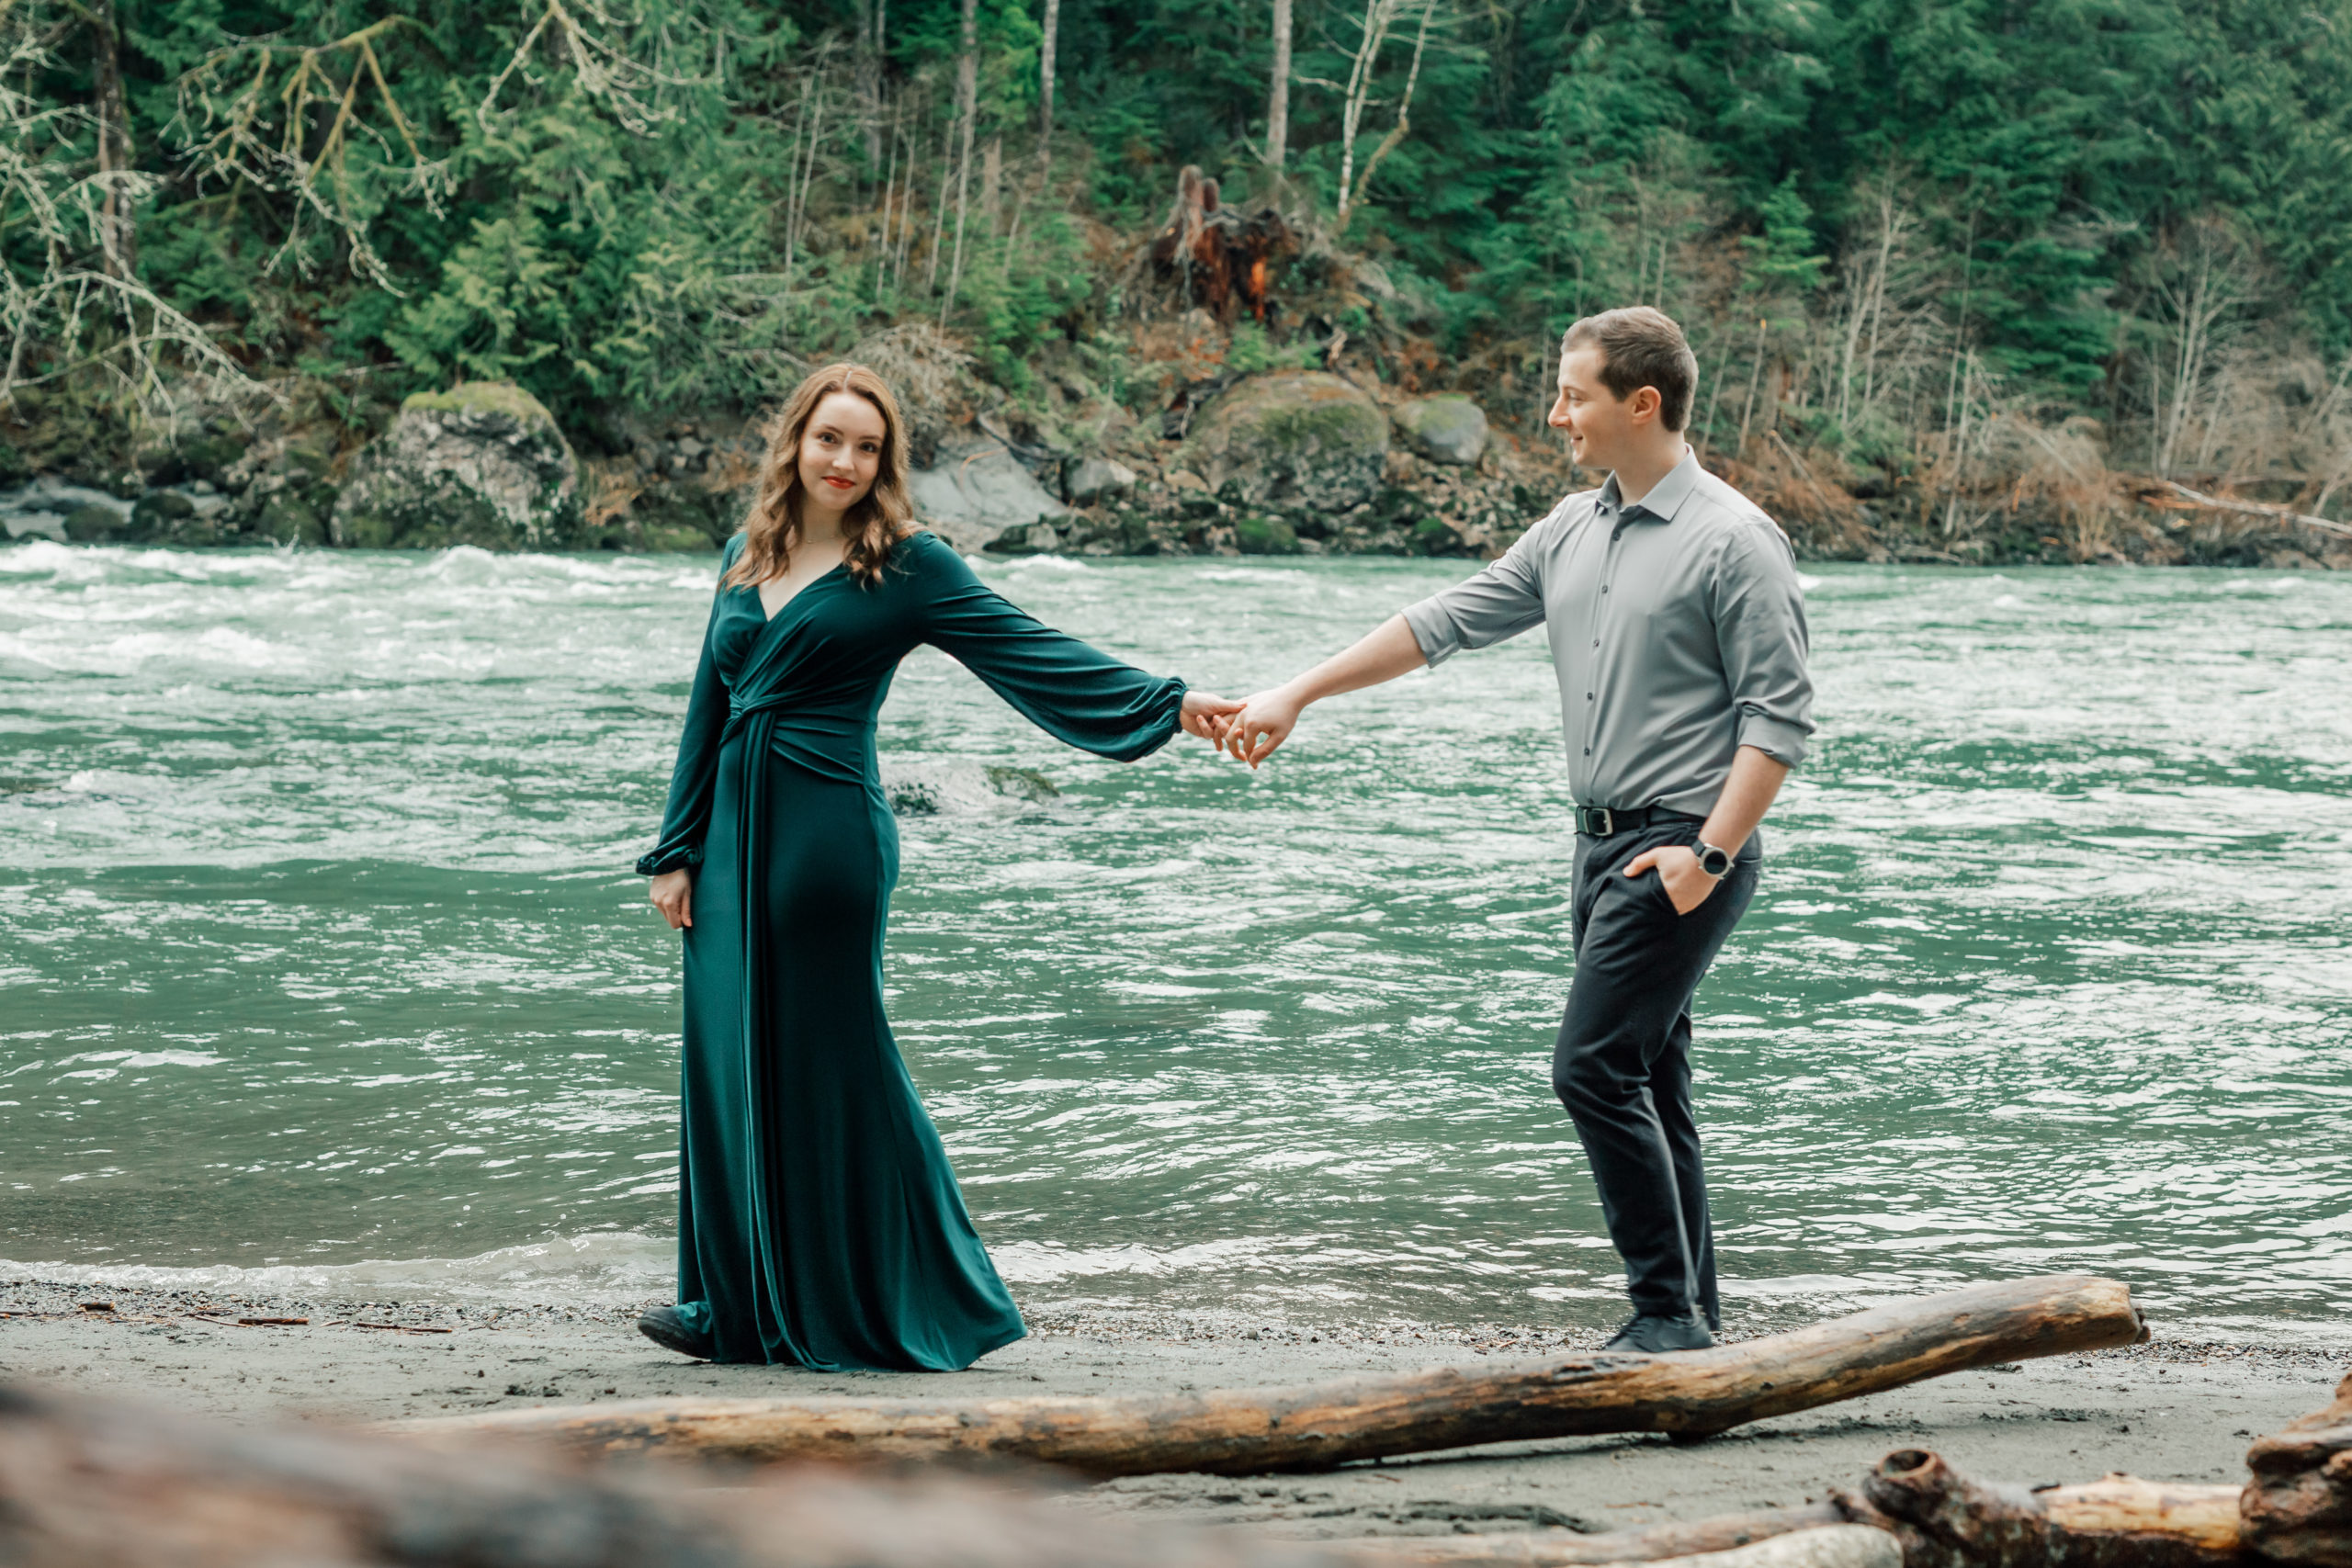 Wintry Snoqualmie Falls Engagement Session by Something Minted Photography